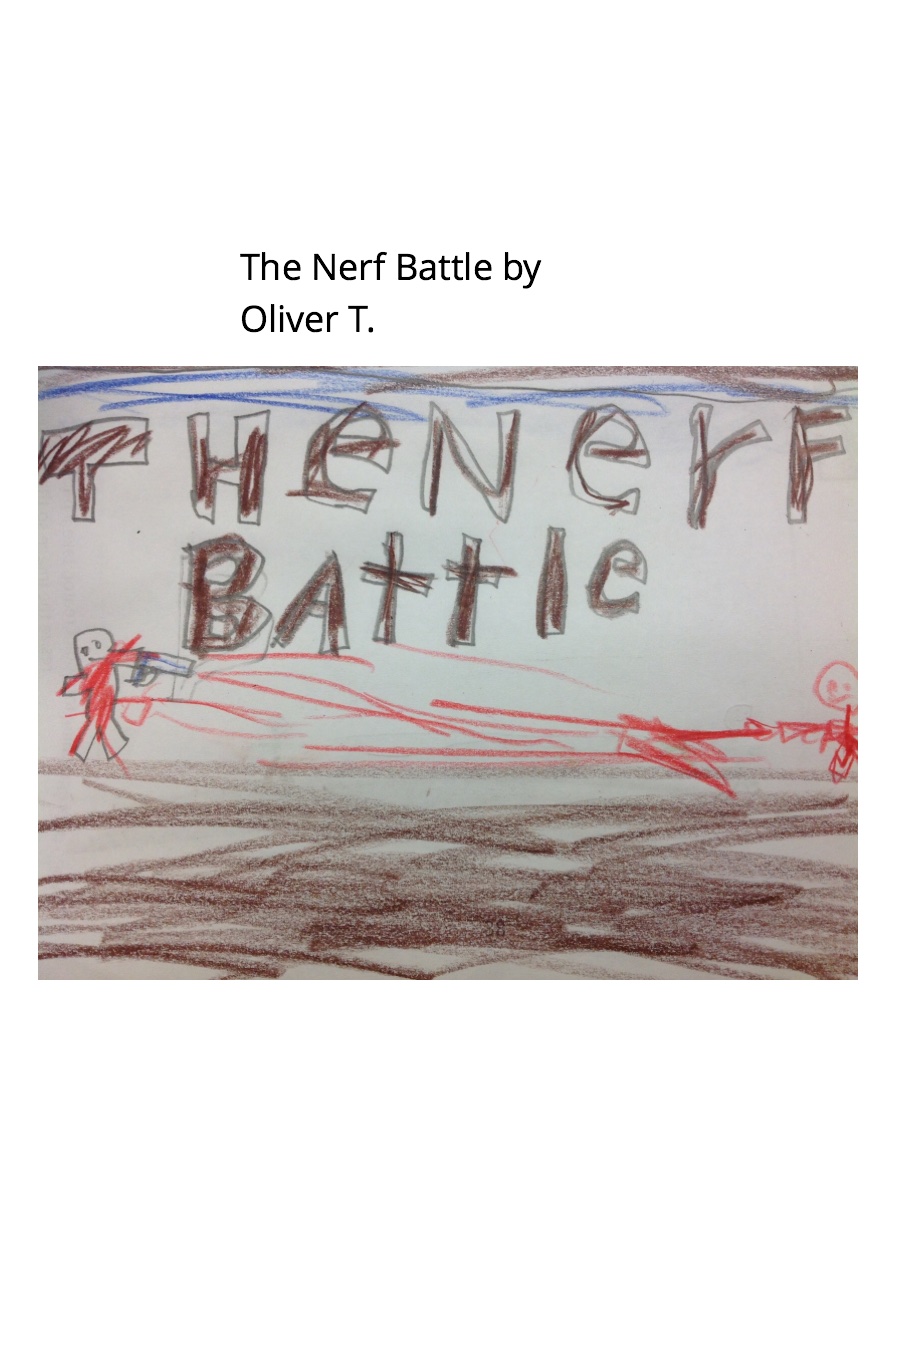 THE NERF BATTLE by Oliver T